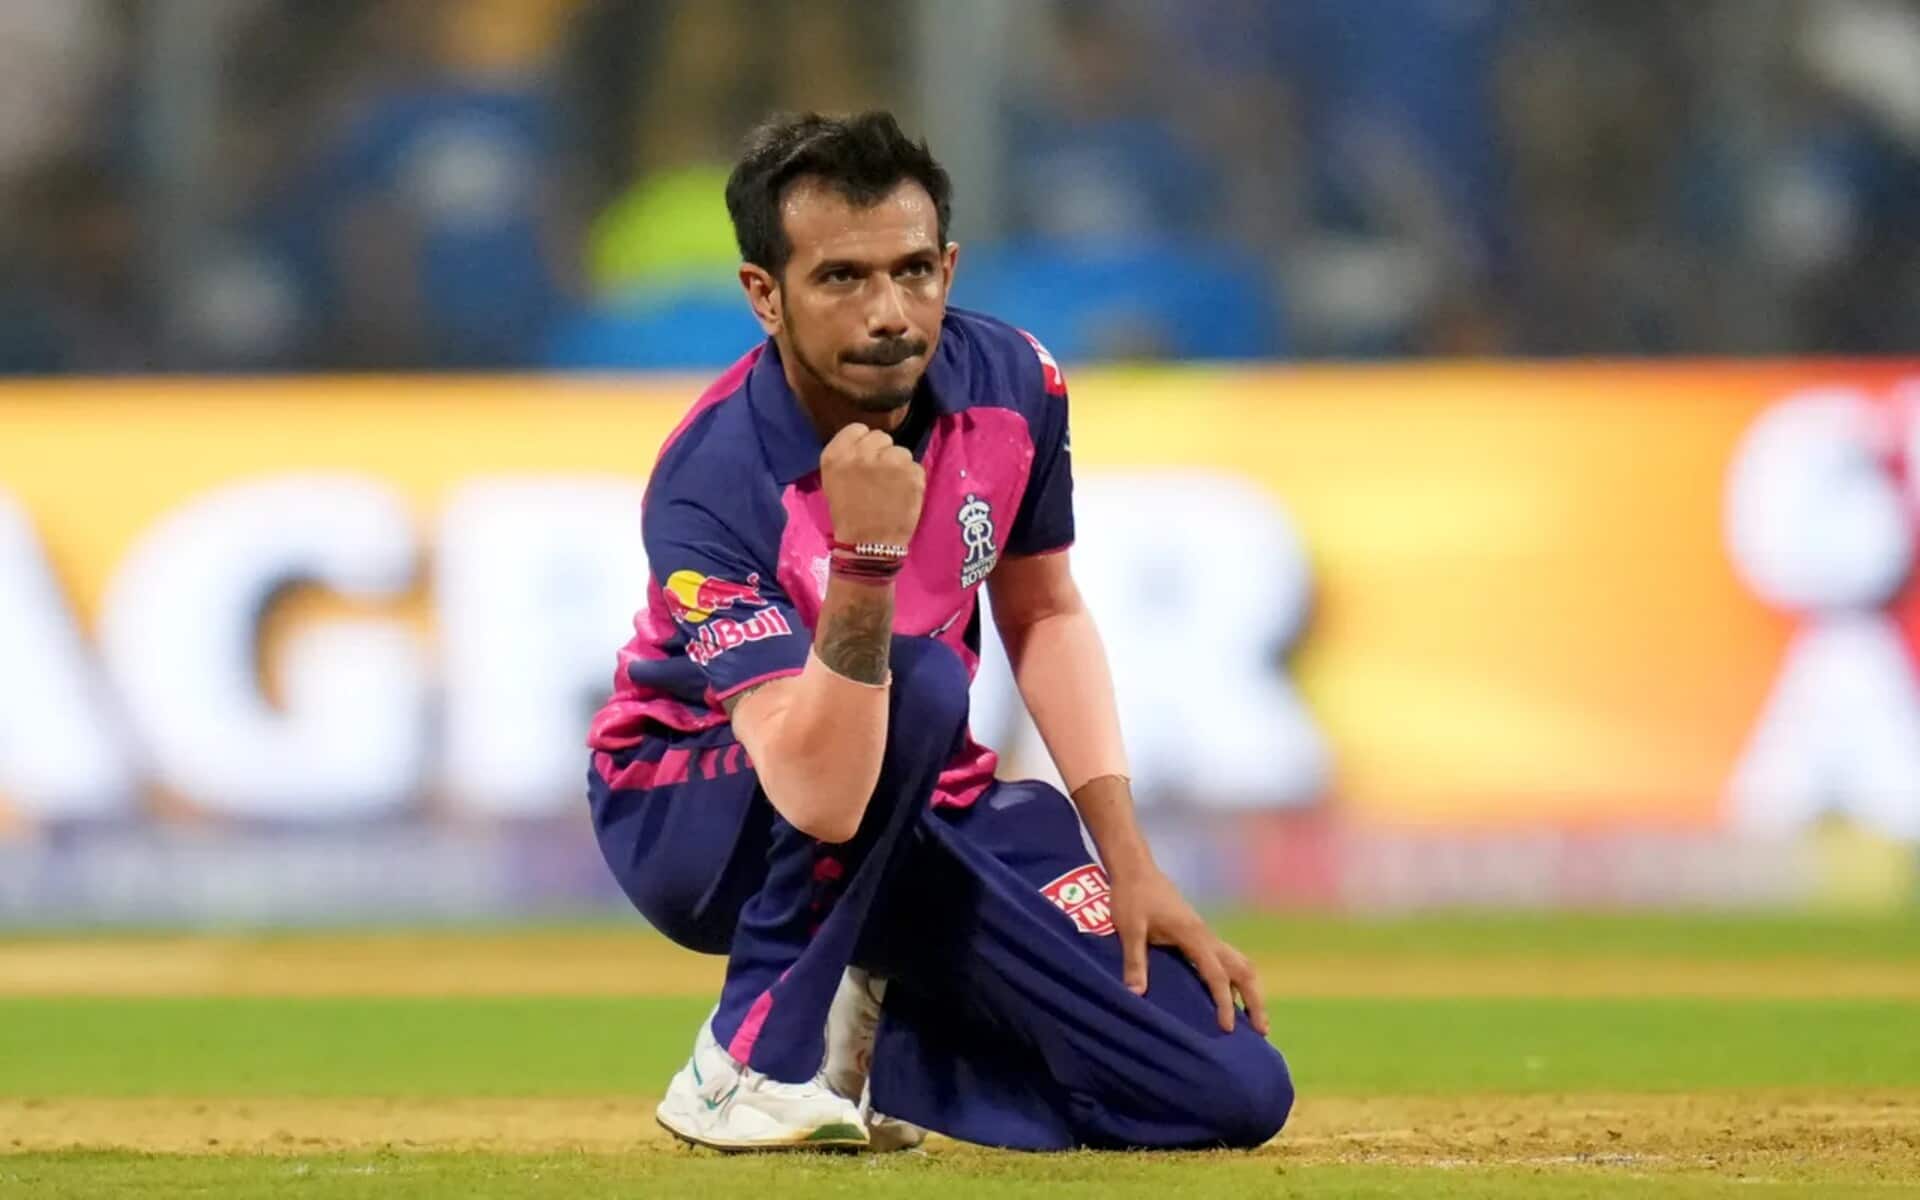 Chahal celebrating a wicket against MI on Monday (Source: IPL)